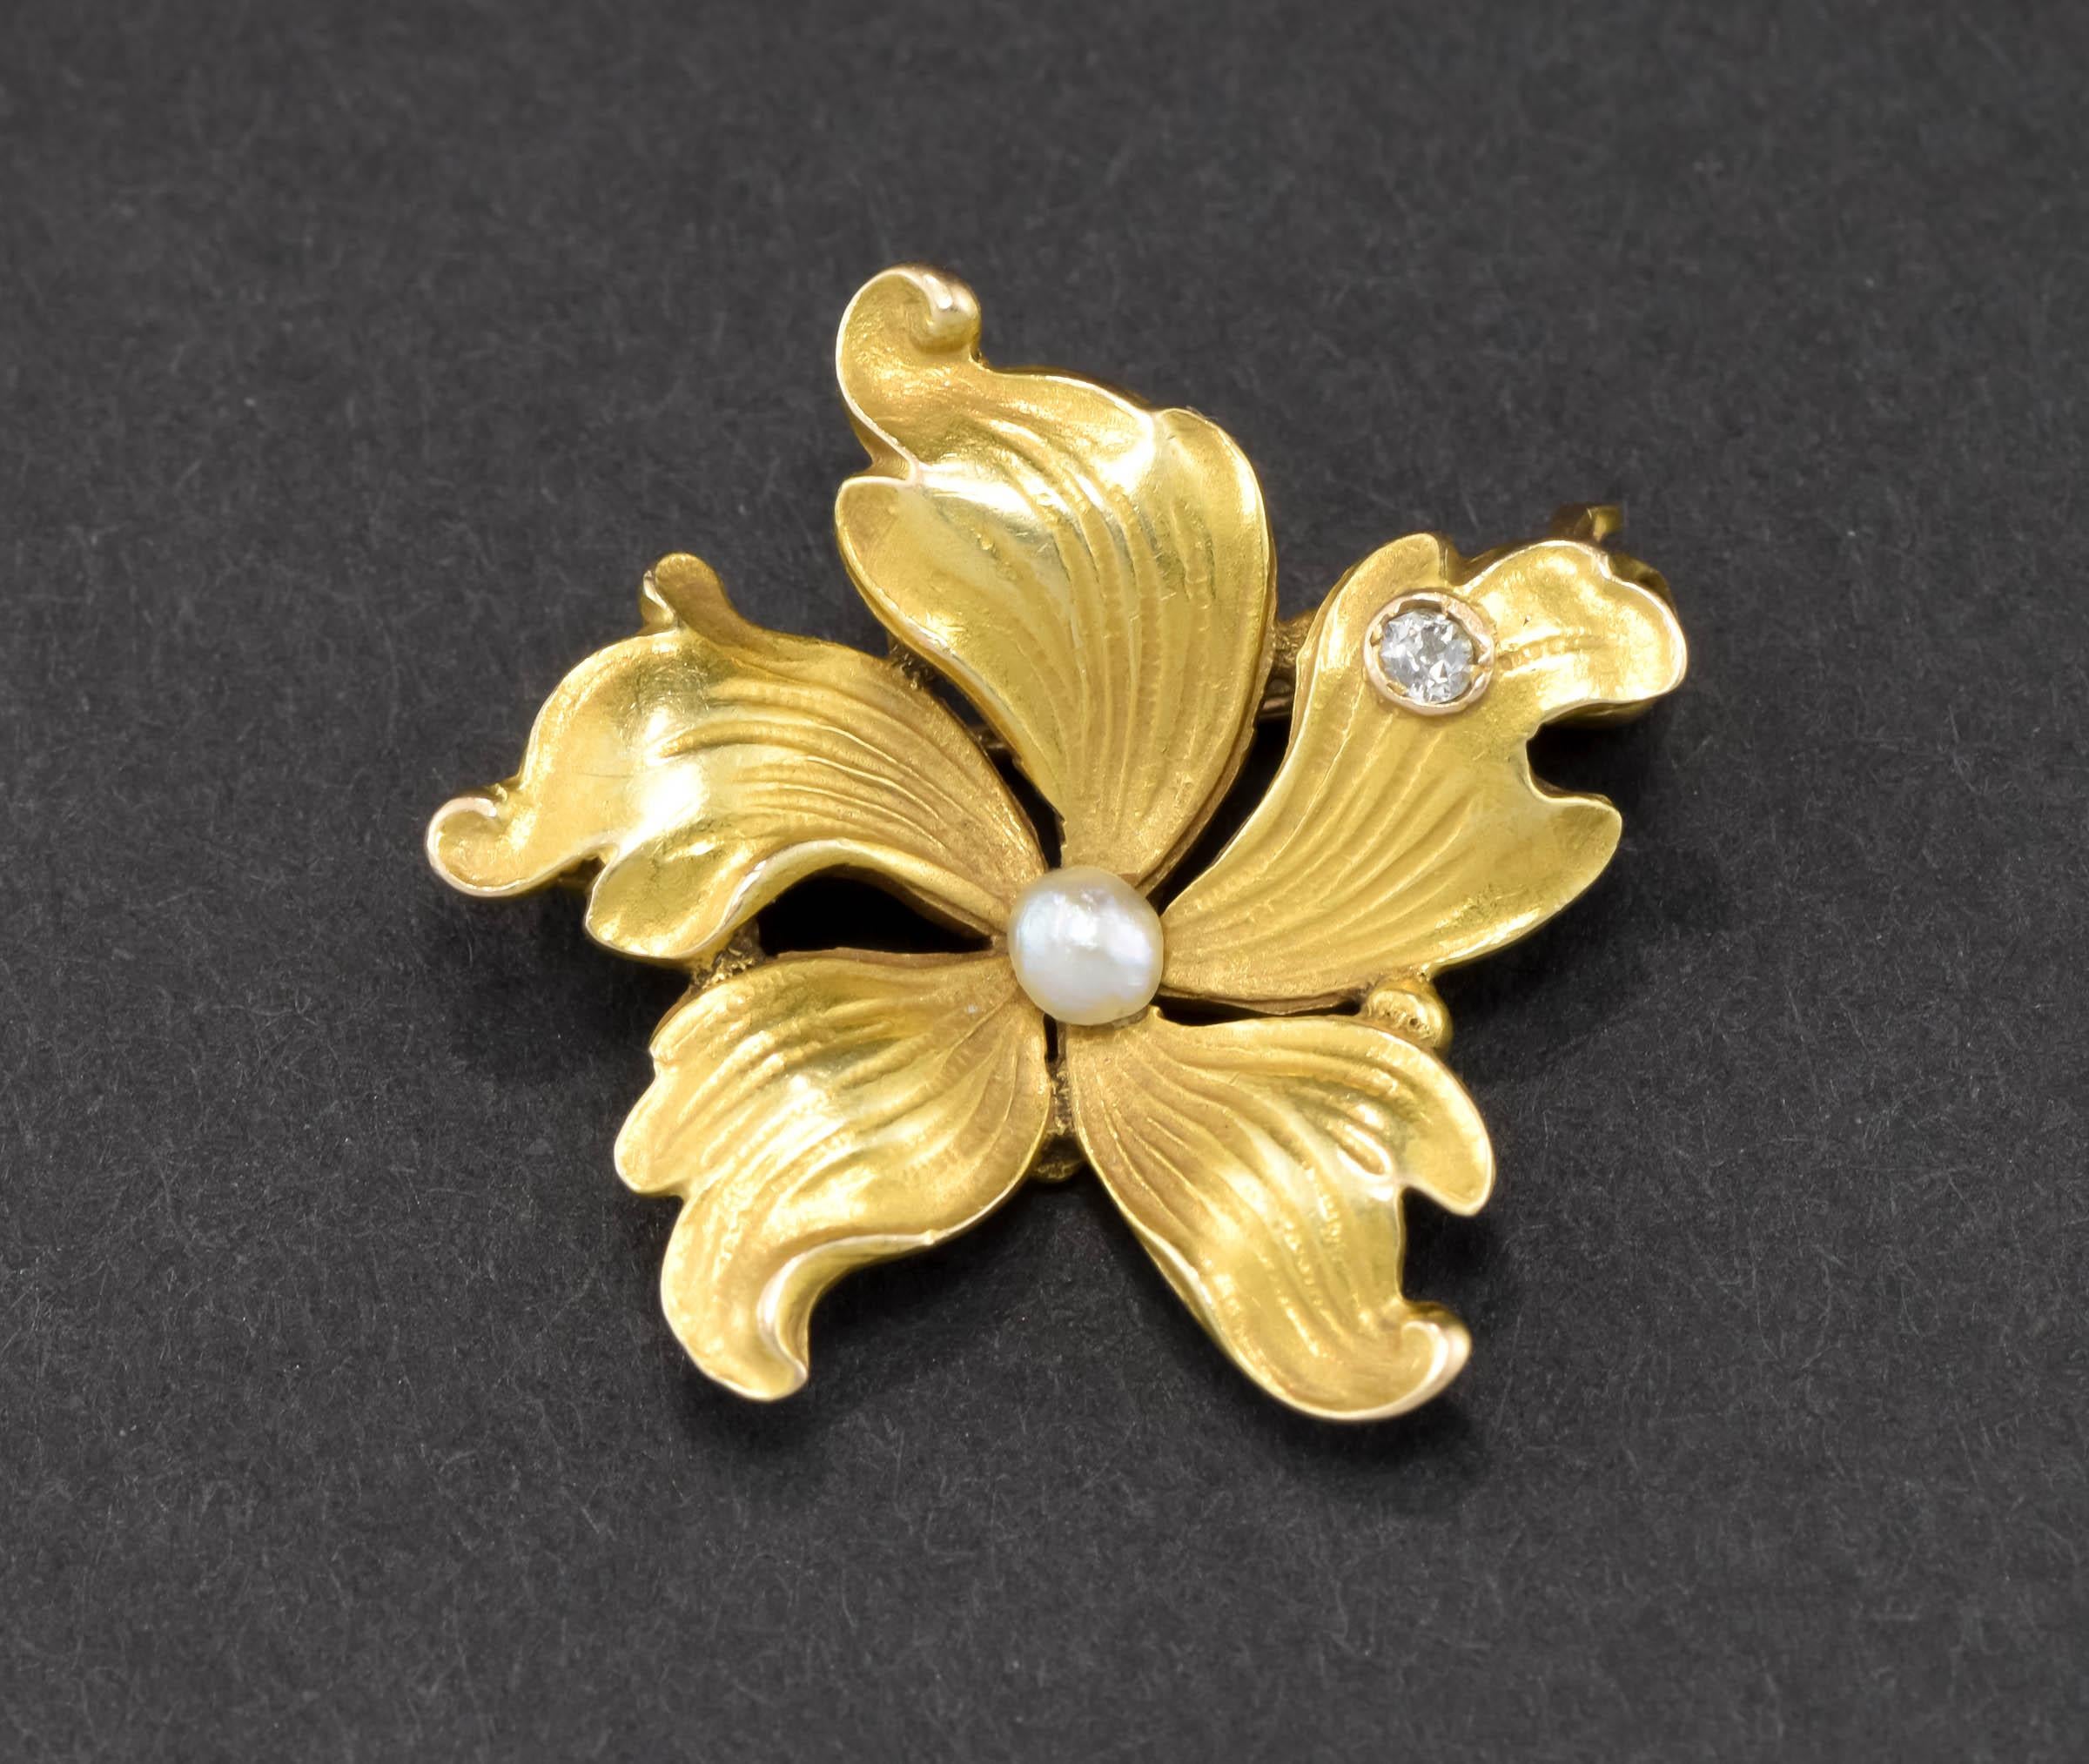 Offered is a beautiful, dainty and petite Art Nouveau period gold flower brooch pin in lovely original condition.

Finely made in 14K yellow gold, the piece retains most of its original bloomed finish with the characteristic matte surface so popular